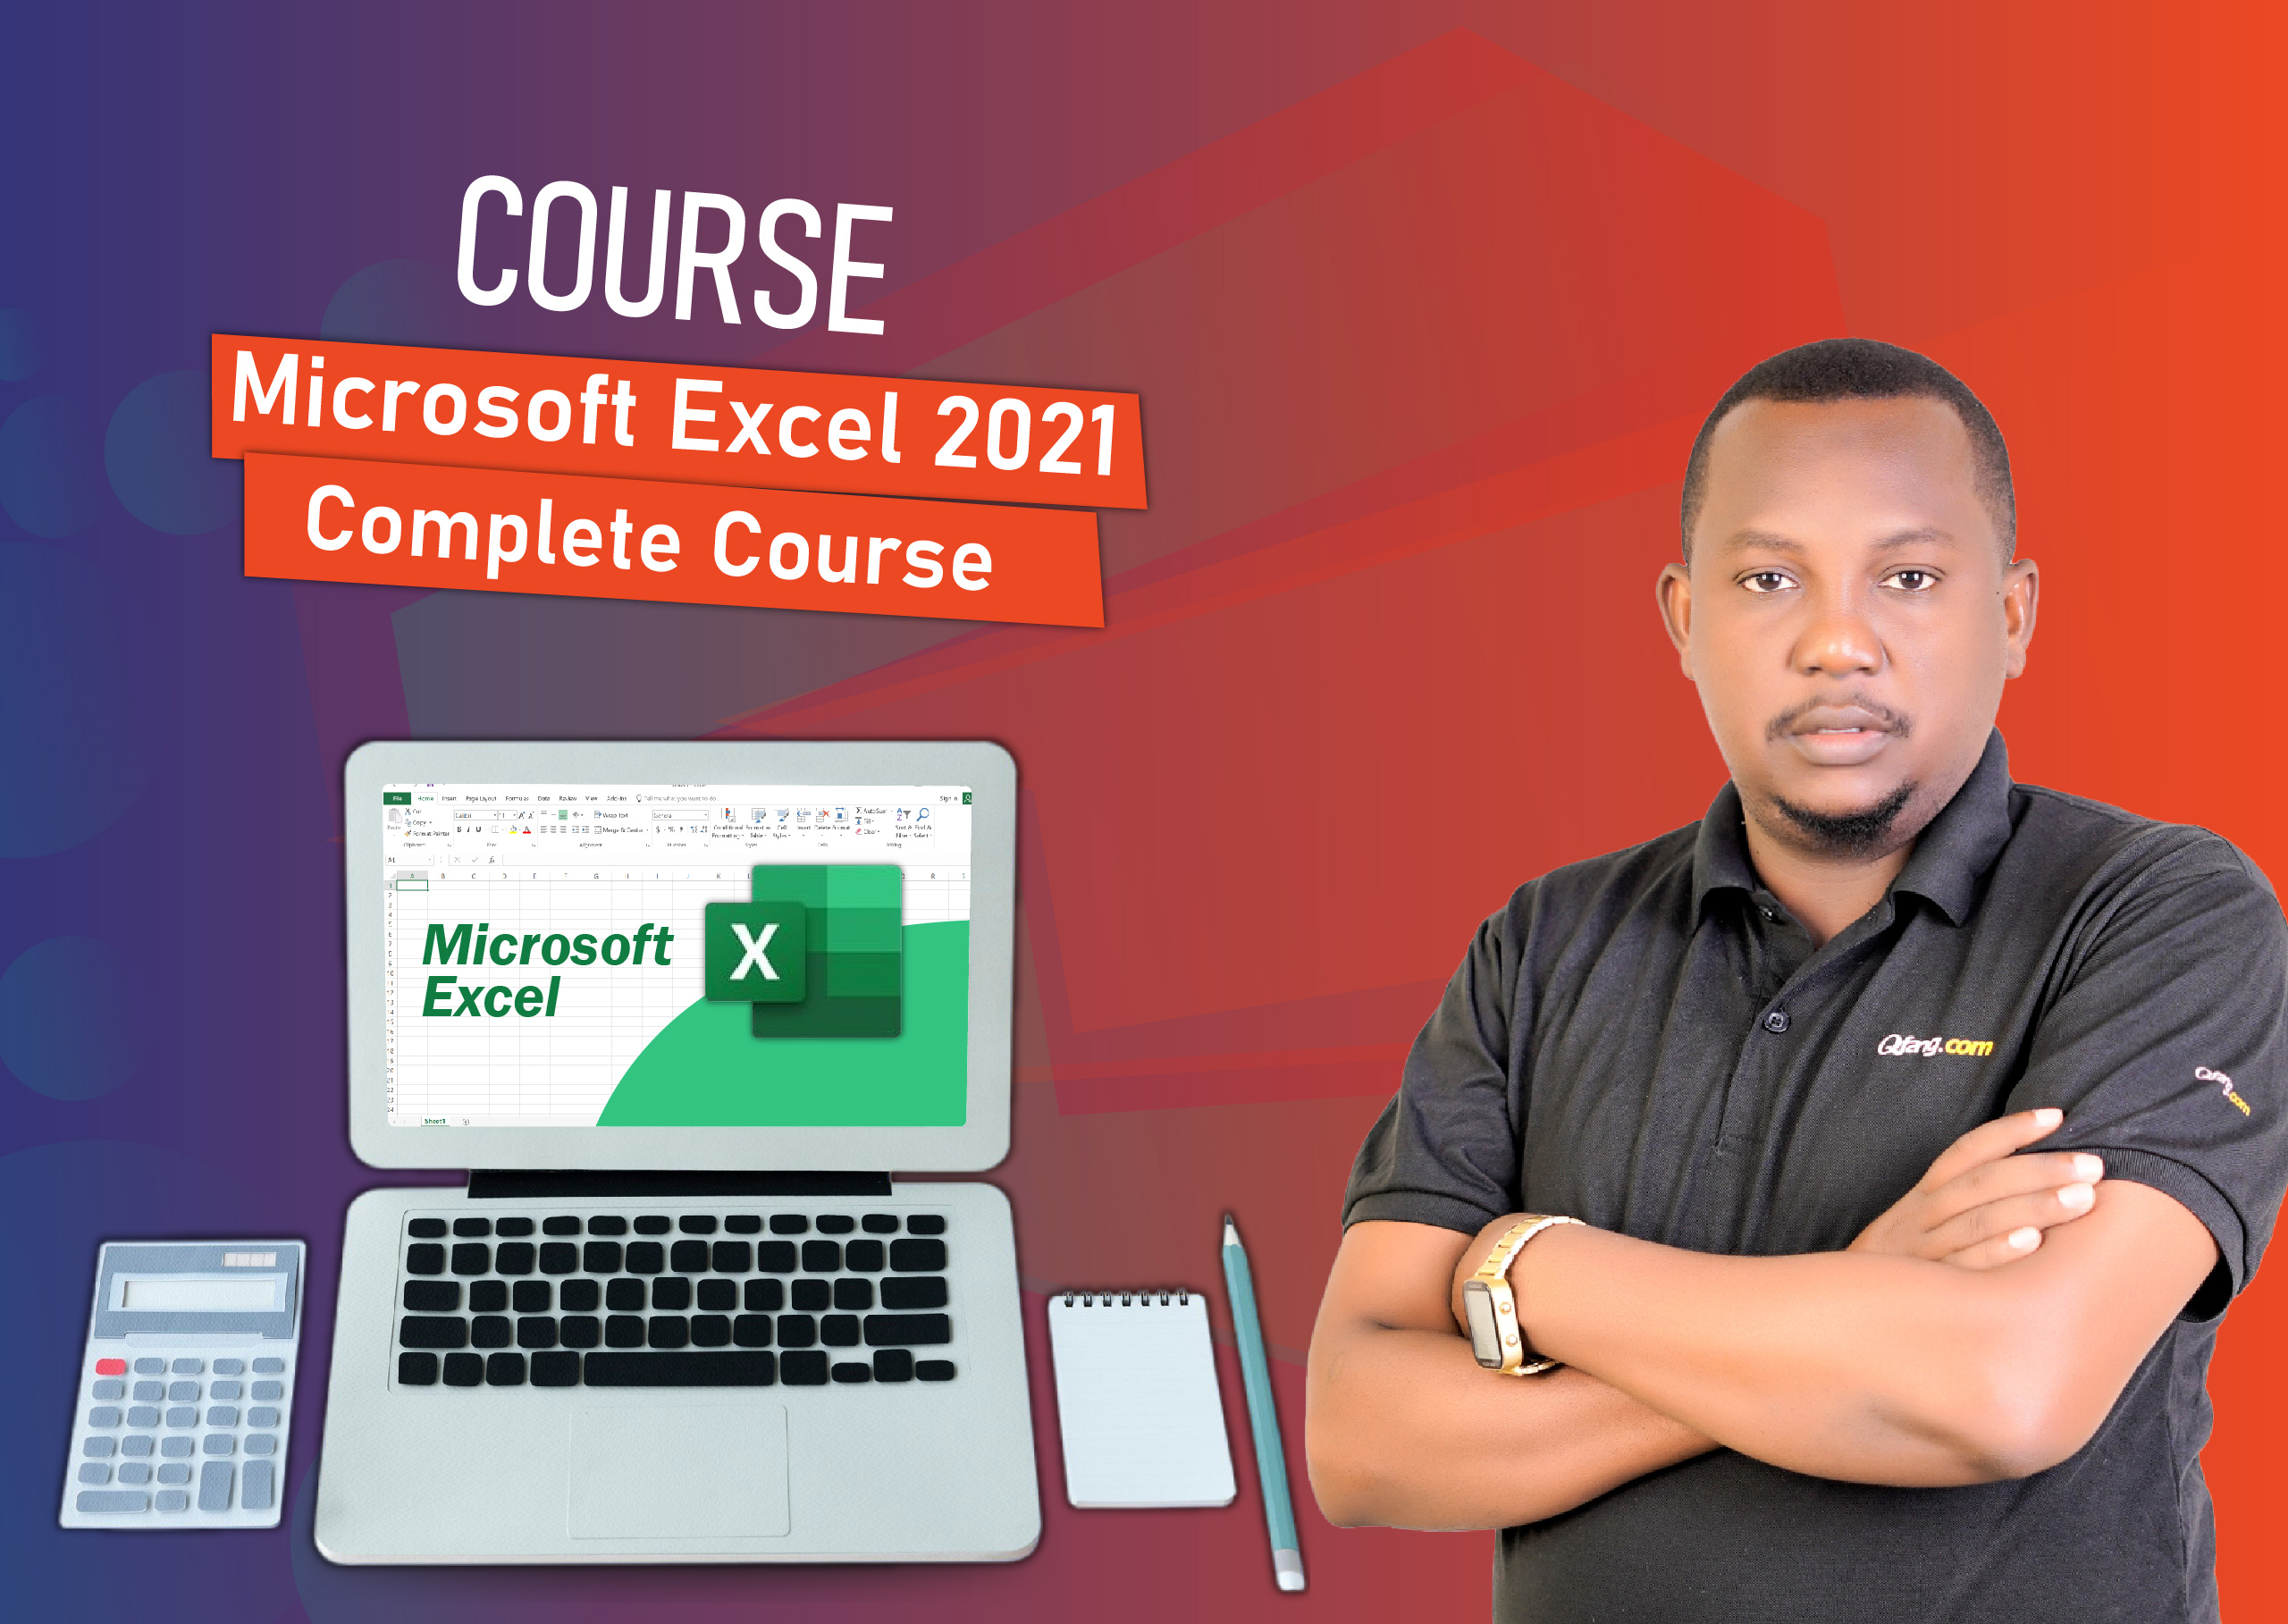 Microsoft Excel 2021 Complete Course